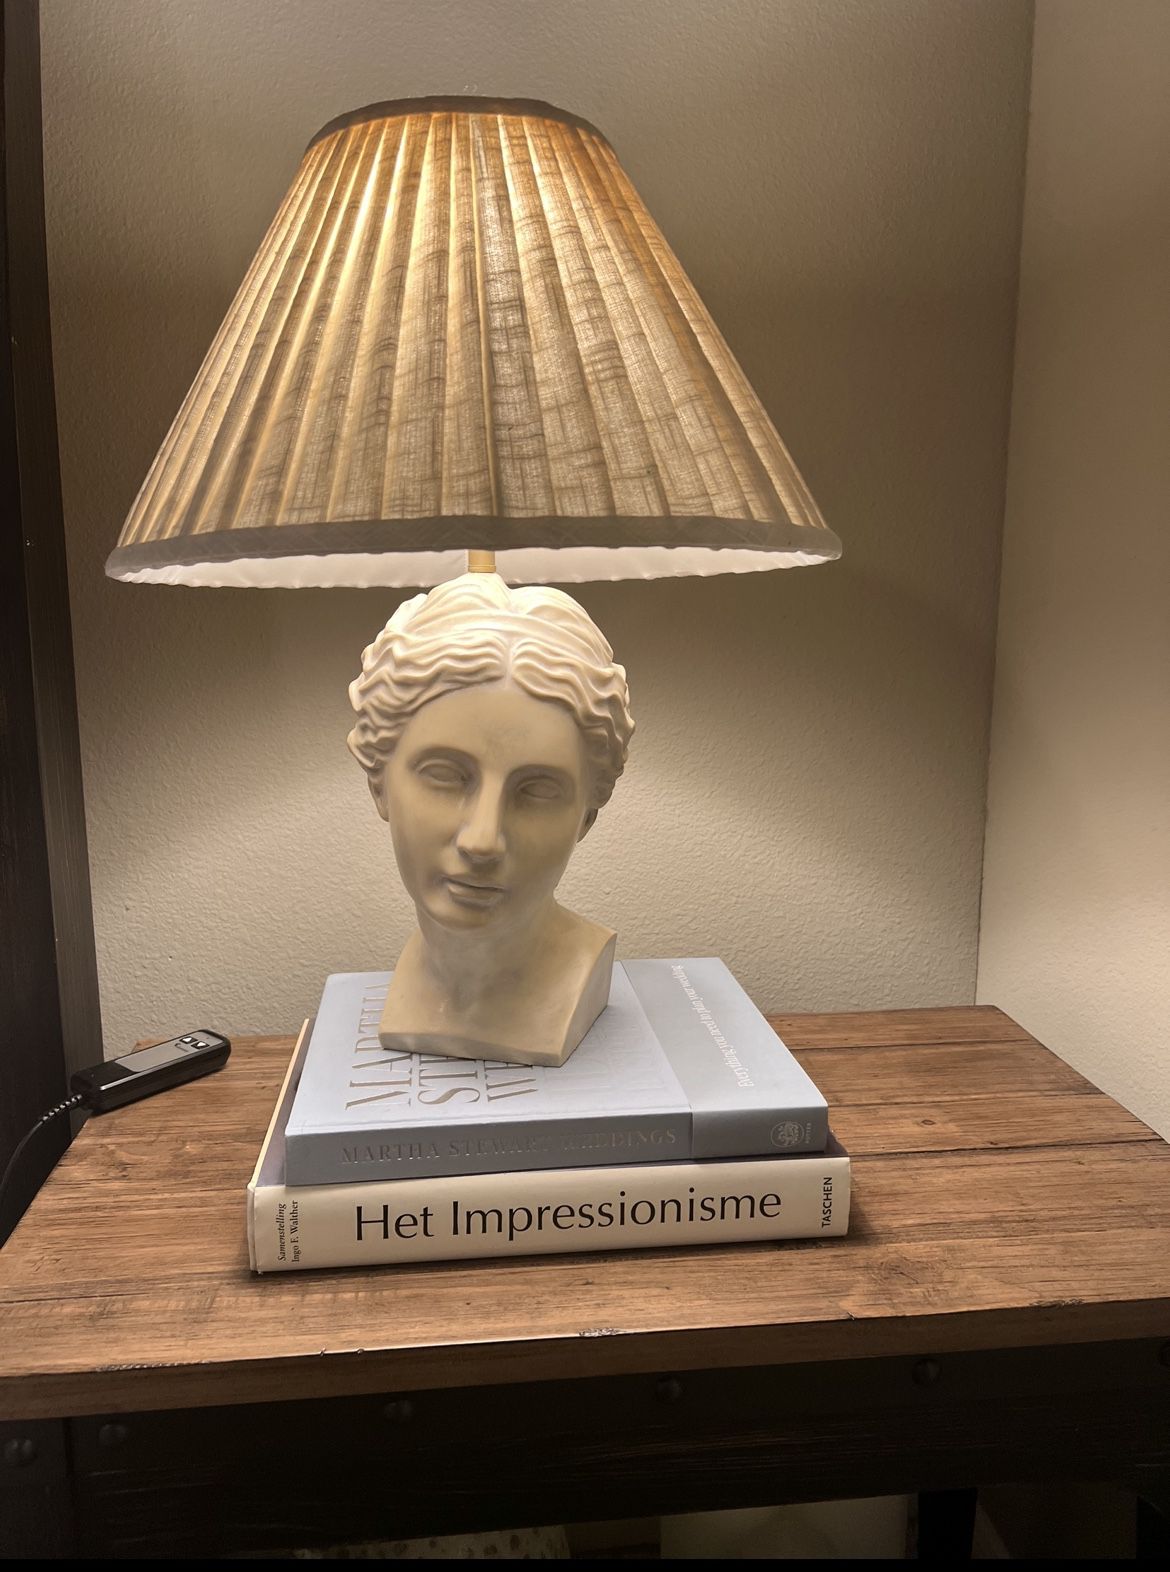 Grecian Bust Table Lamp